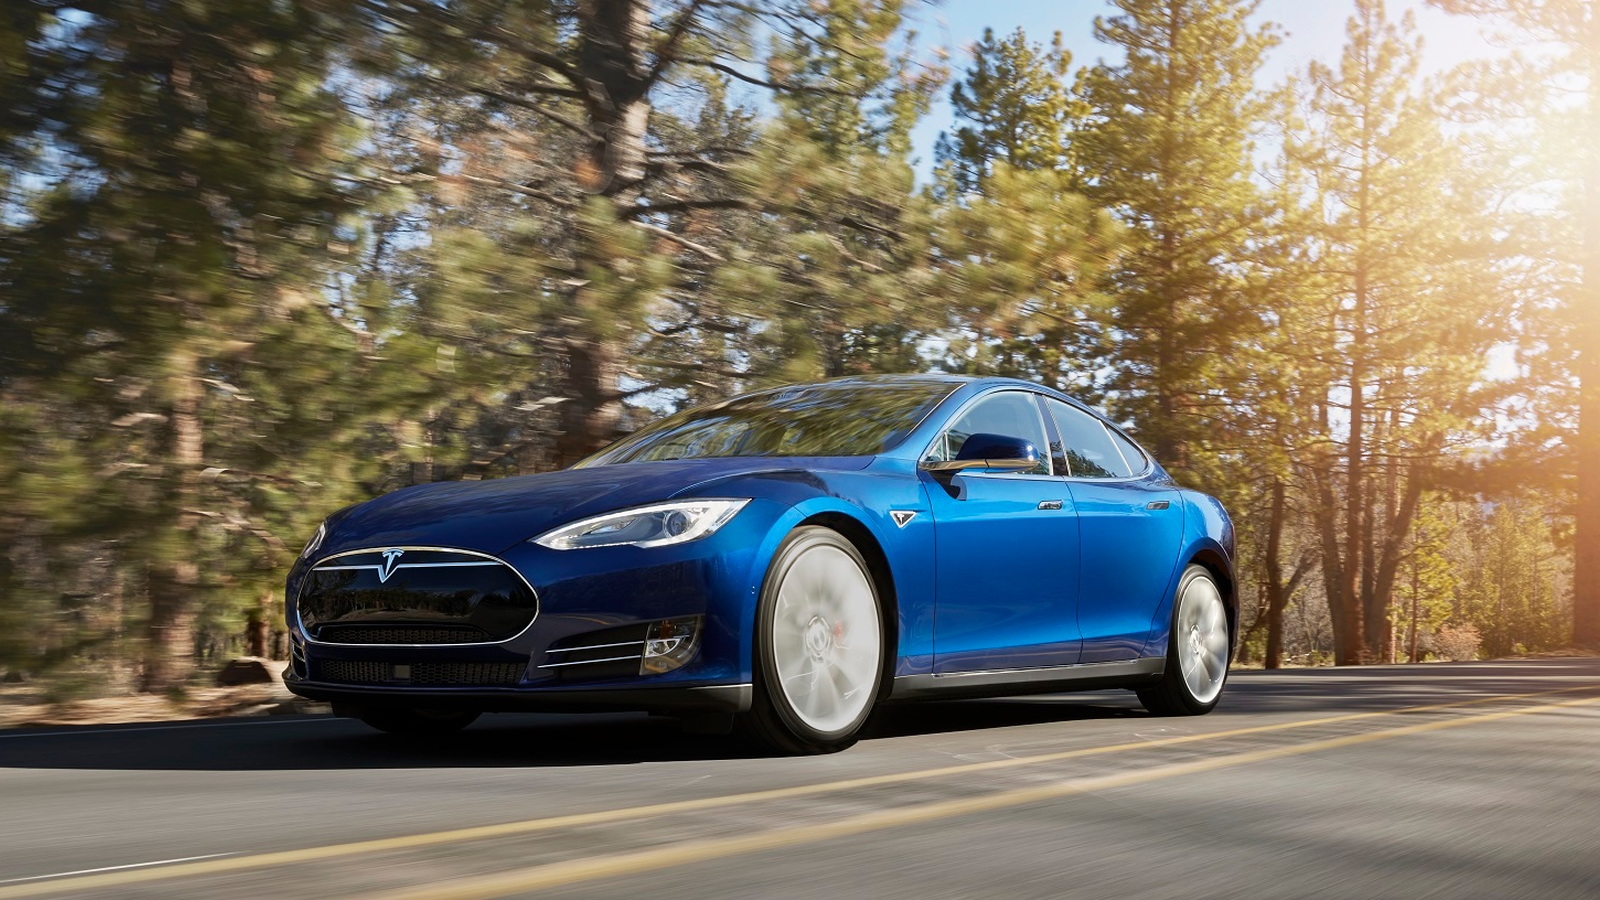 How to Minimize Range Loss in Your 2015 Model S 85D Tesla While Parked for Extended Periods